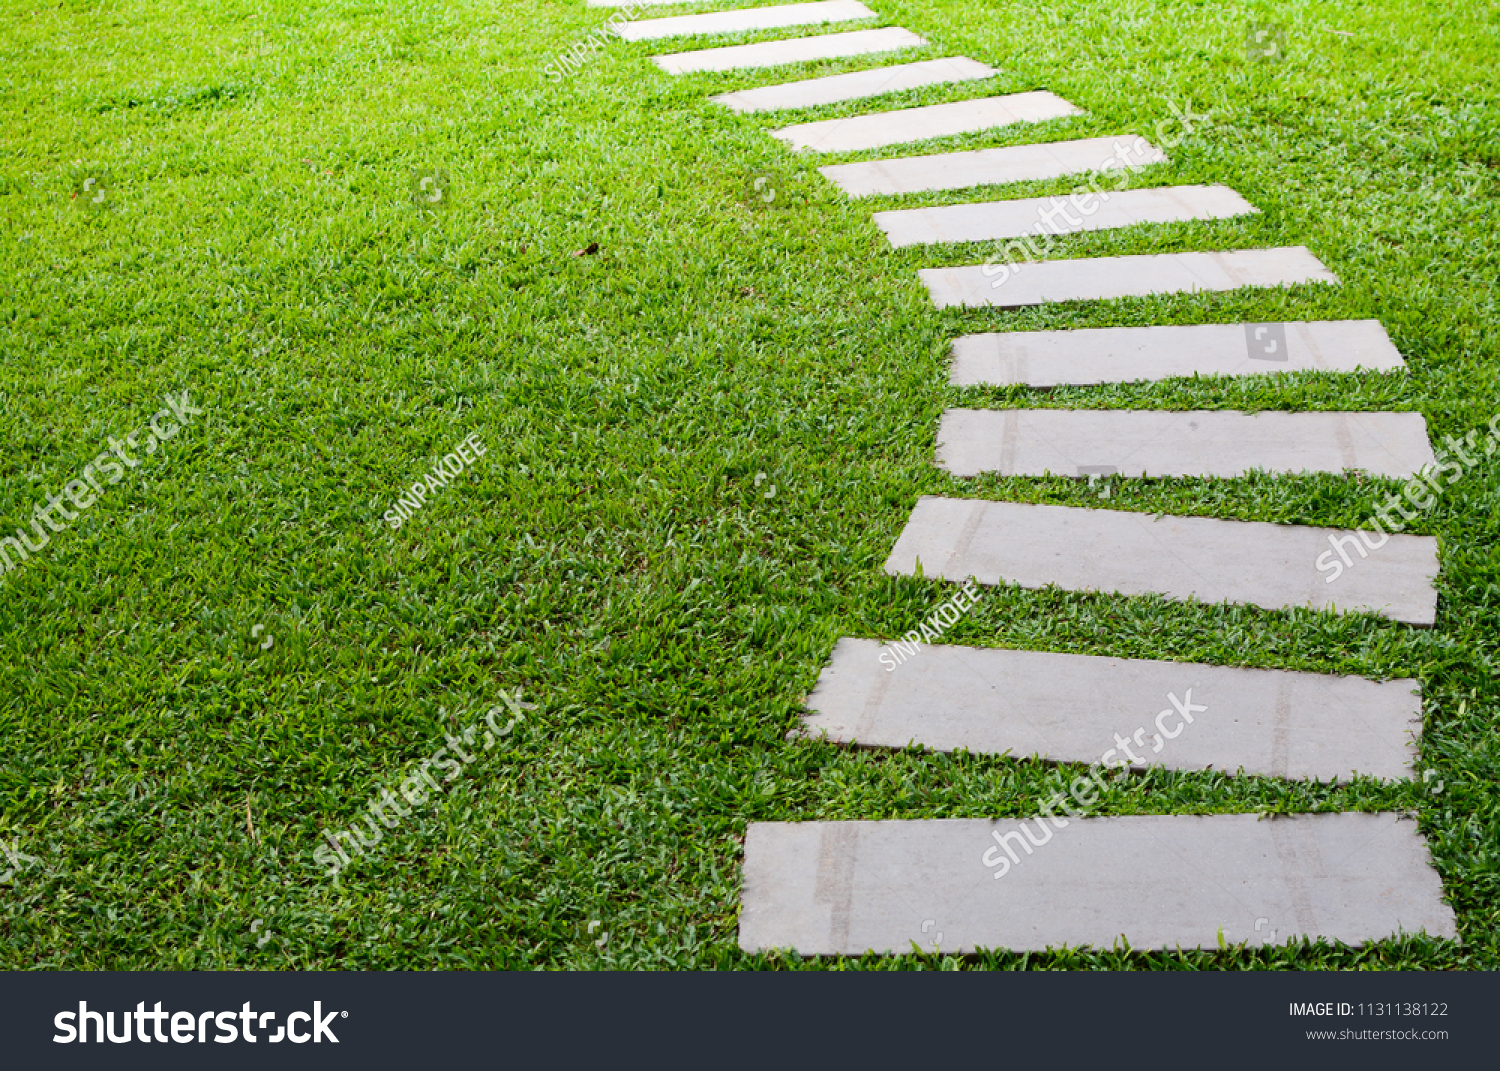 Pathway in the garden outdoor, forward stepping stones or pebbled in the grass lawn. Using for the roadway to success, achievement, leadership, milestone, vision, and mission concept. #1131138122